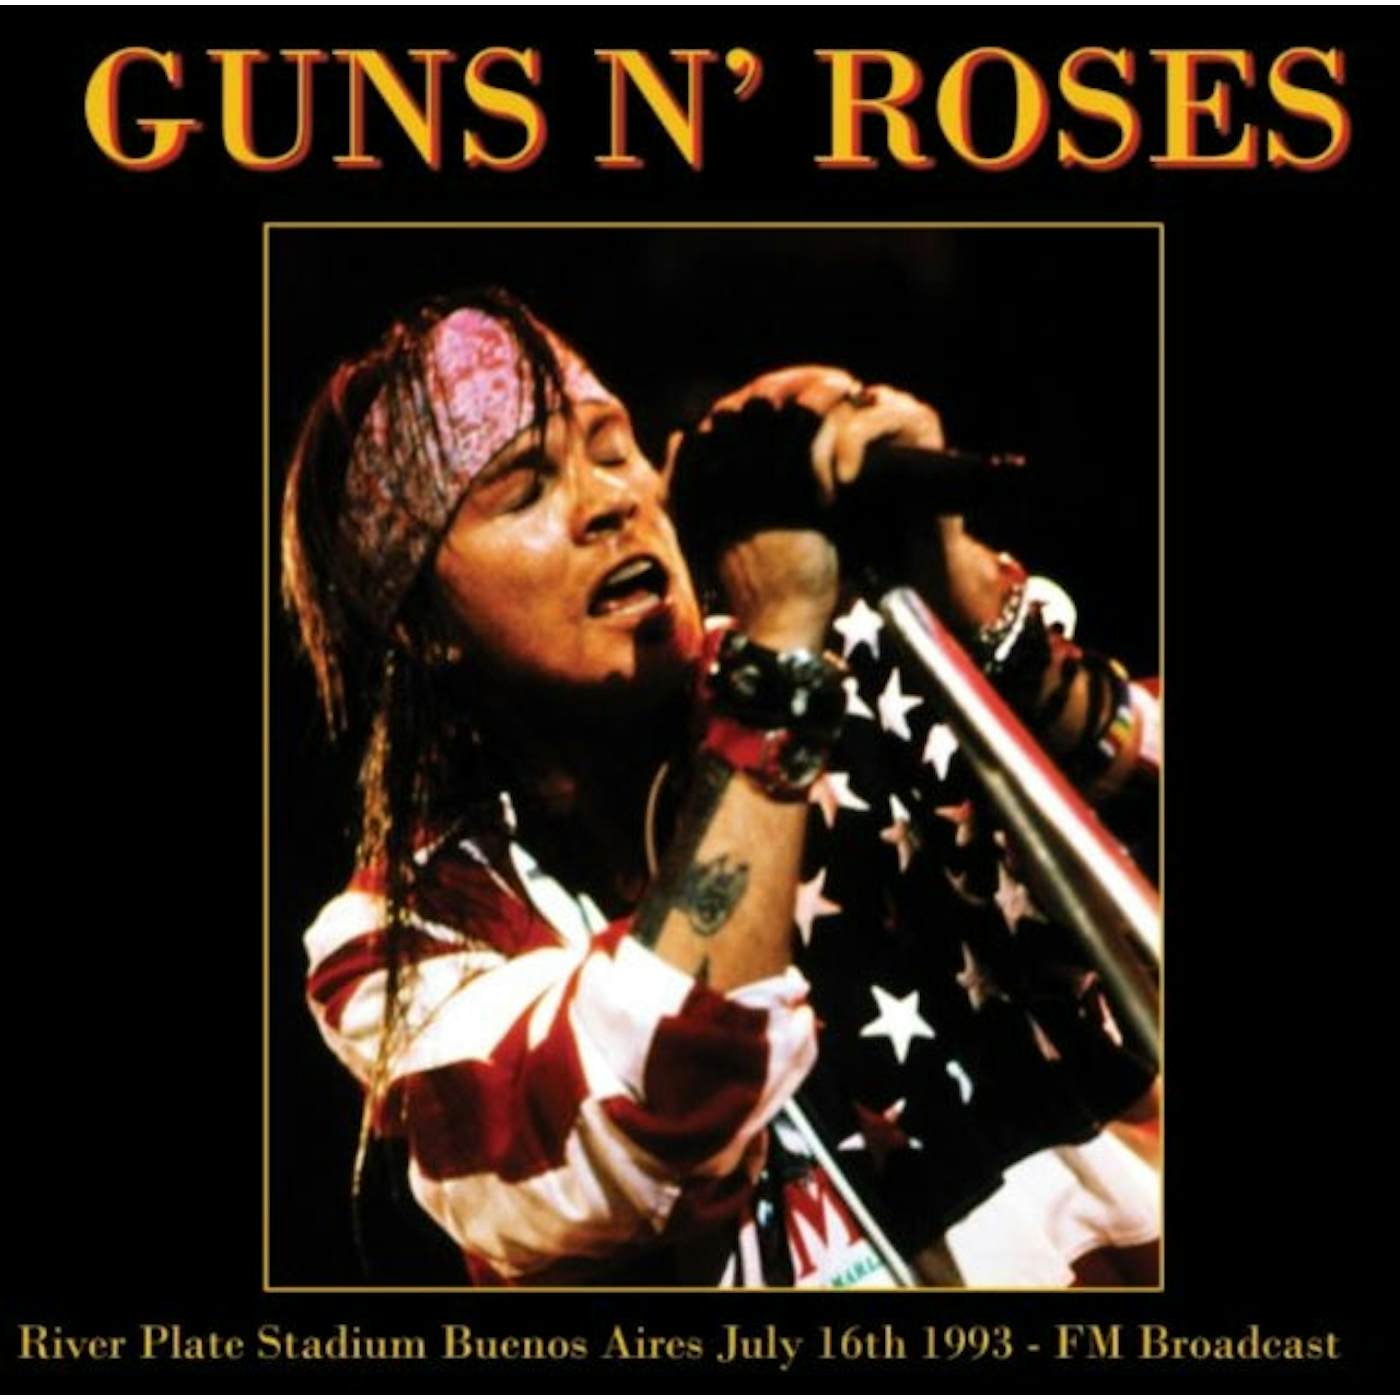 Guns N' Roses LP - River Plate Stadium Buenos Aires July 16th 1993 - Fm Broadcast (Yellow Vinyl)